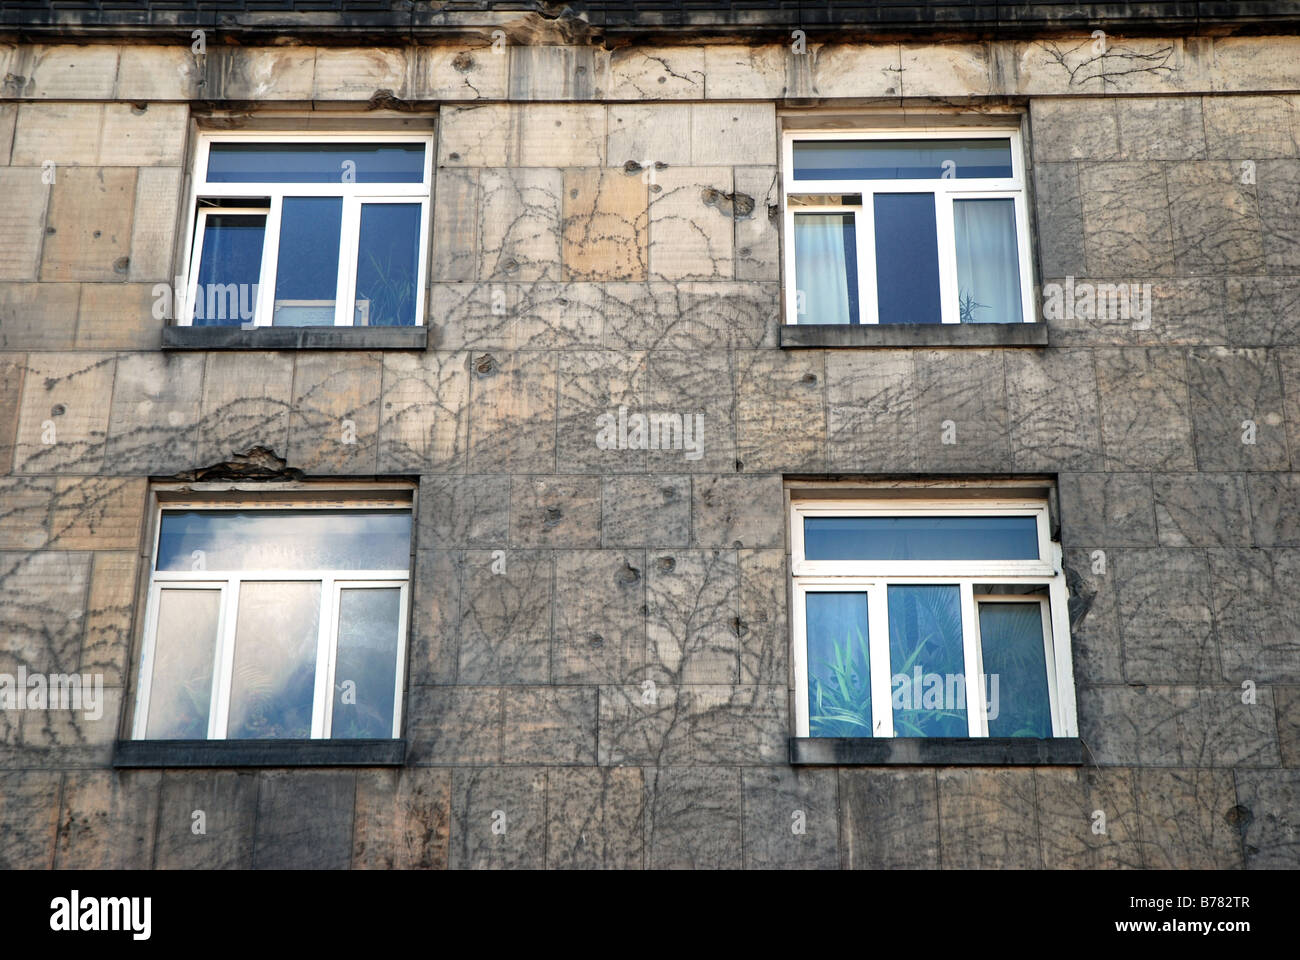 Remains of Warsaw Uprasing from 1944 against Nazi occupation. Bullet holes on the building wall, 11 Krakowskie Przedmiescie St. Stock Photo